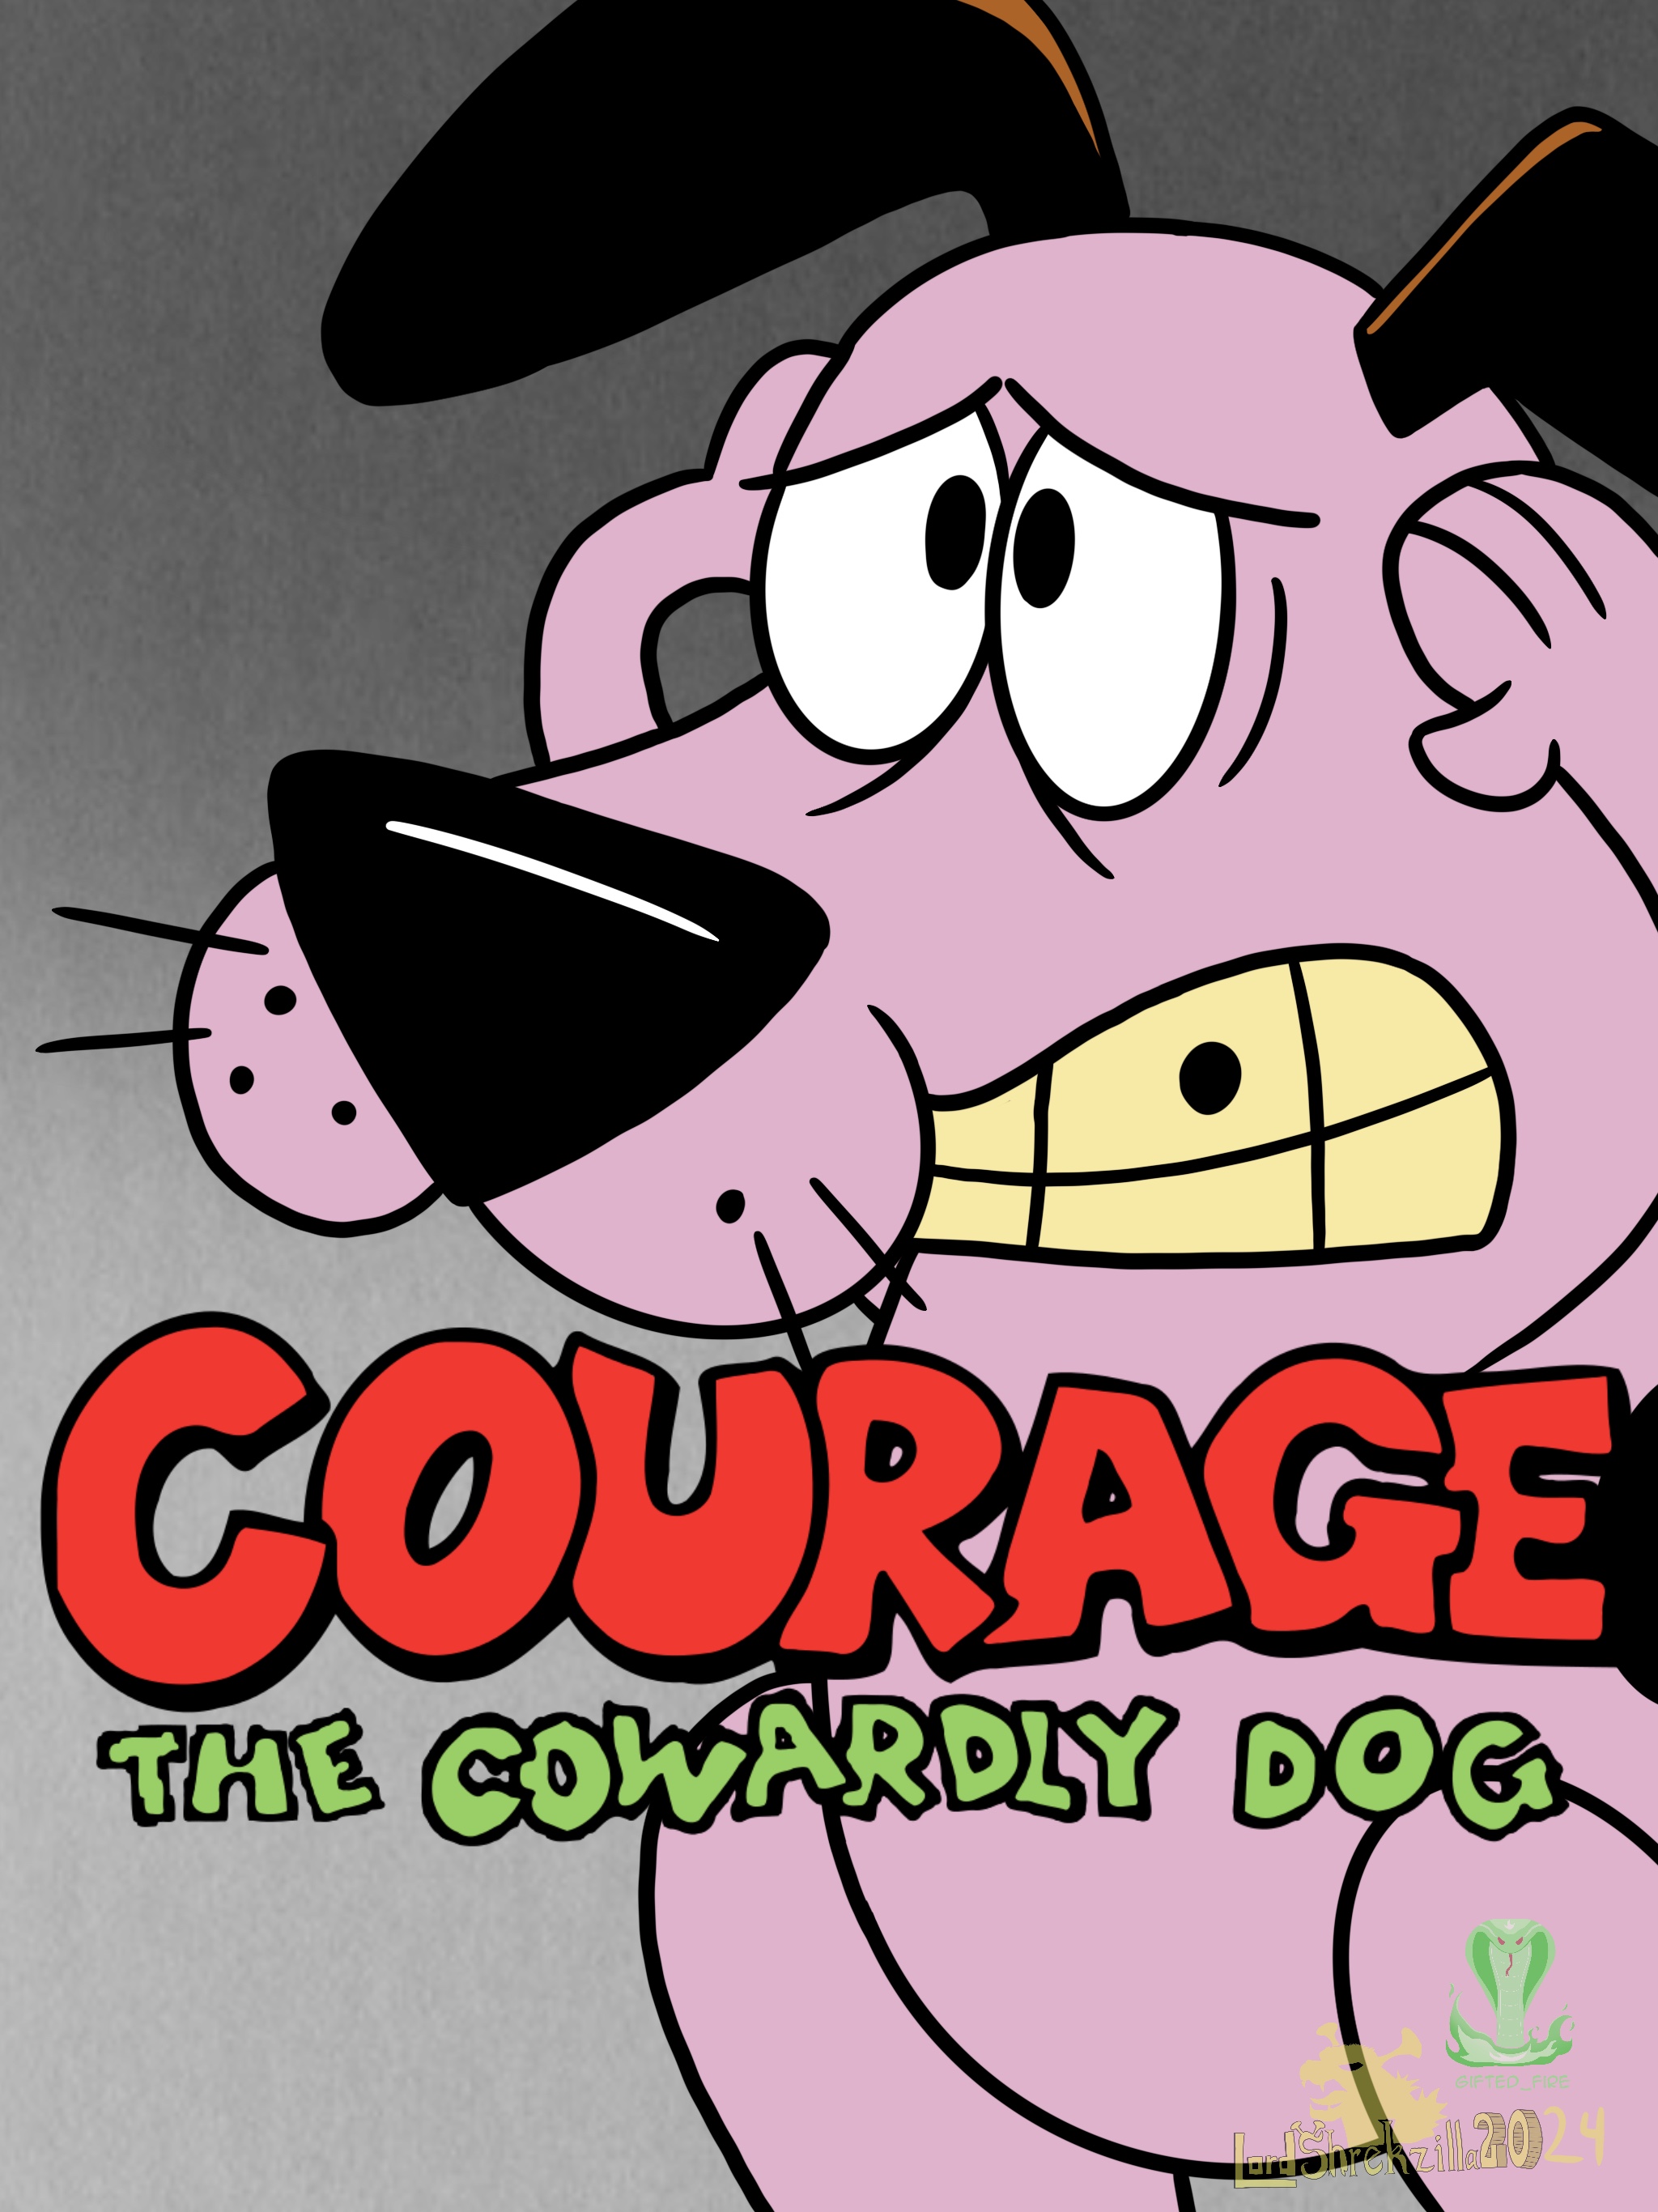 Courage In The Loud House Style Commission by LordShrekzilla20 on ...